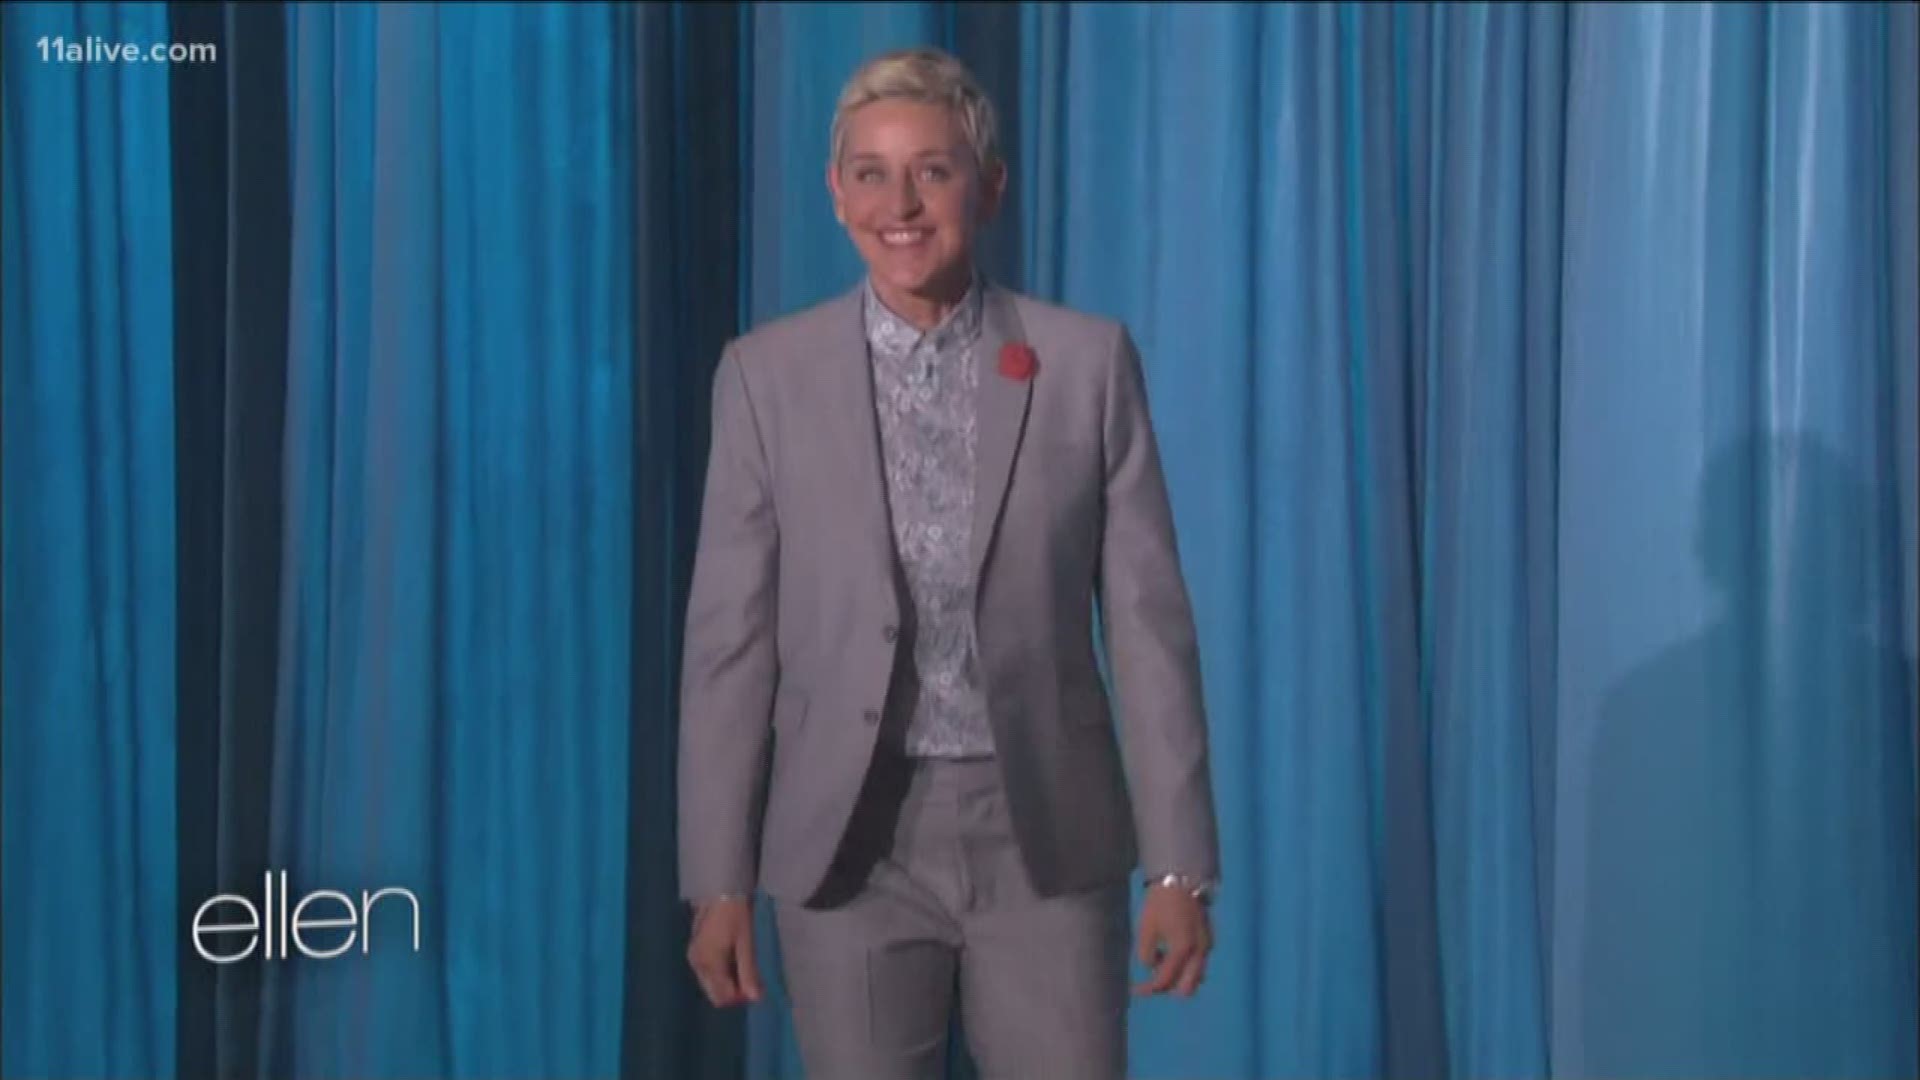 America's favorite talk show host Ellen DeGeneres told 'The New York Times' that she's considering ending her talk show when her contract is up in 2020.